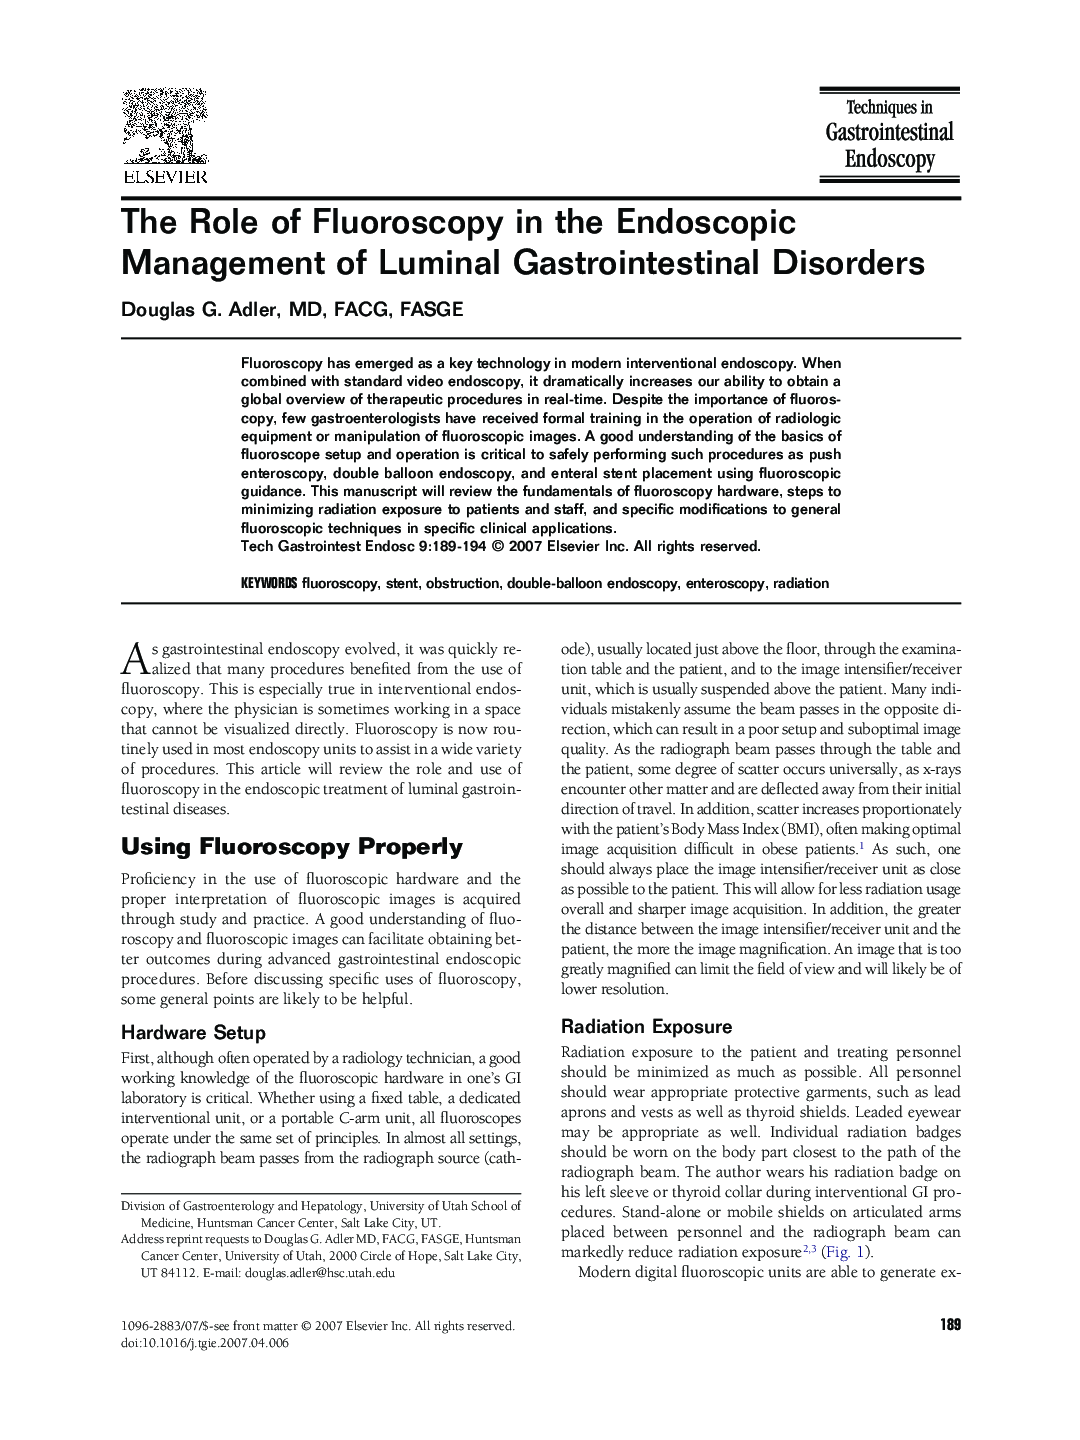 The Role of Fluoroscopy in the Endoscopic Management of Luminal Gastrointestinal Disorders